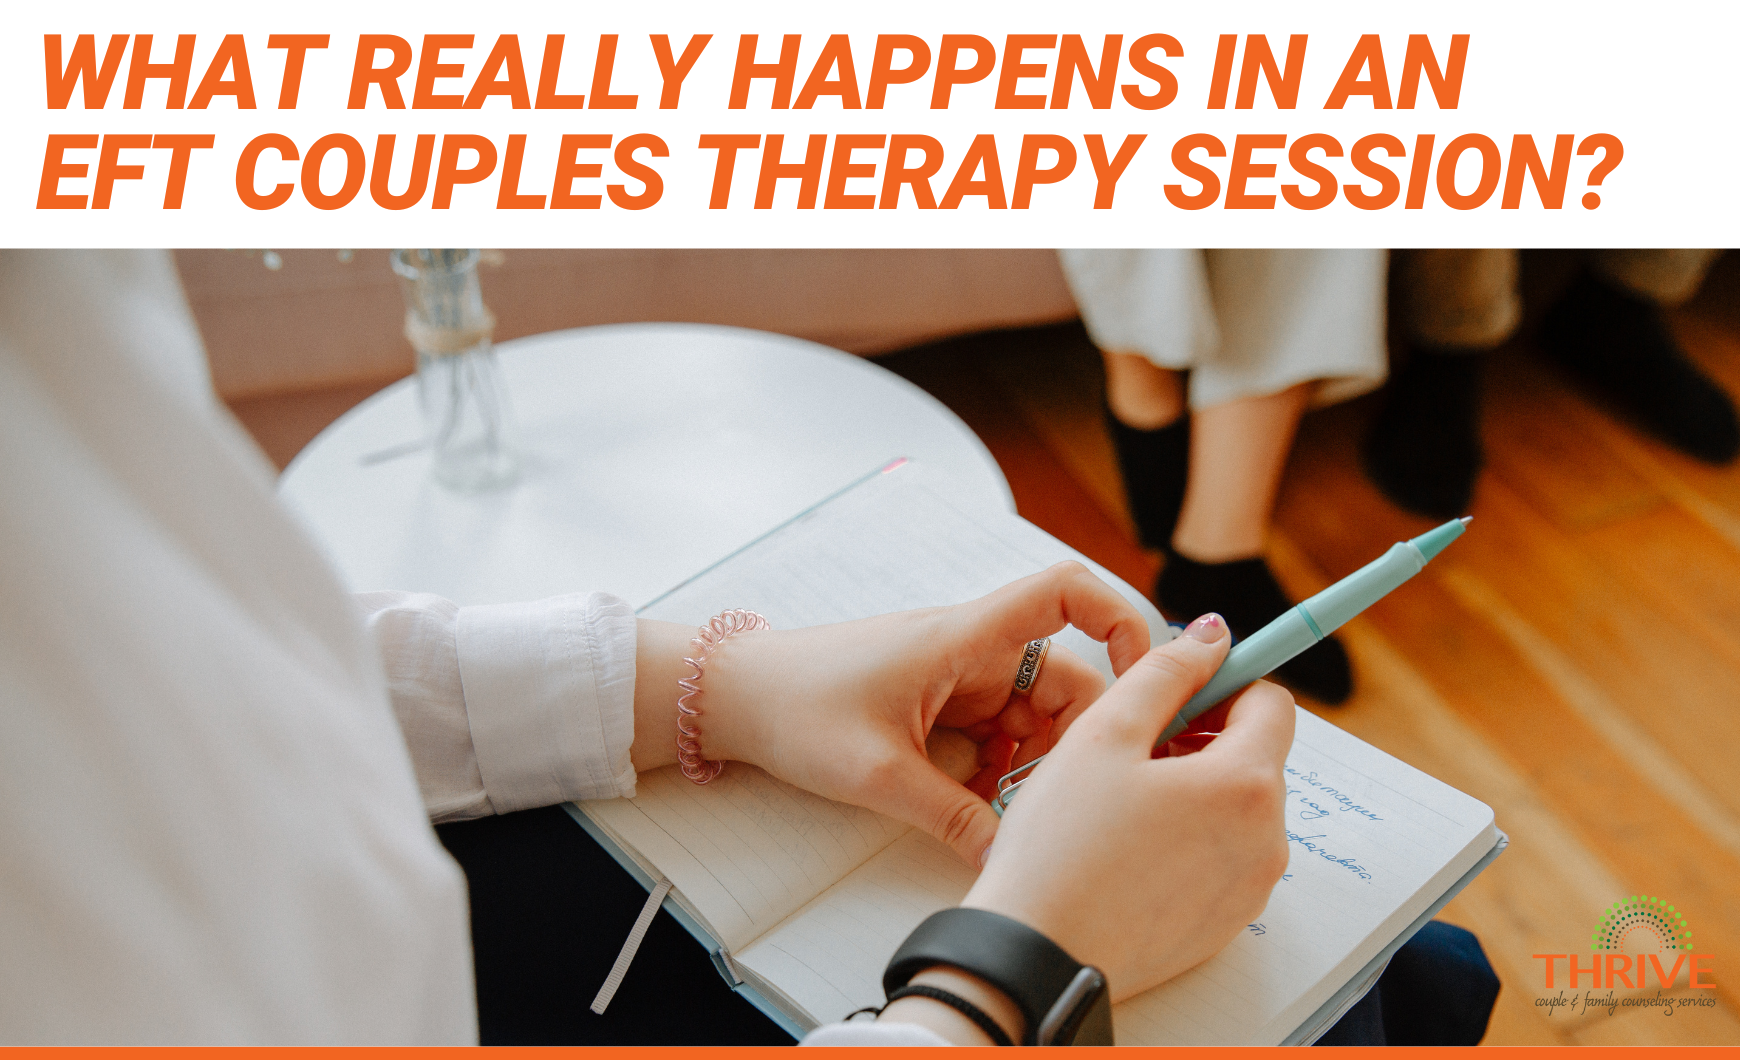 Orange text on a white background that reads "What Really Happens In an EFT Couples Therapy Session?" above a photo of a close up of a therapist's hands writing on a notepad. In the background we can see the legs of a couple seated on a couch.